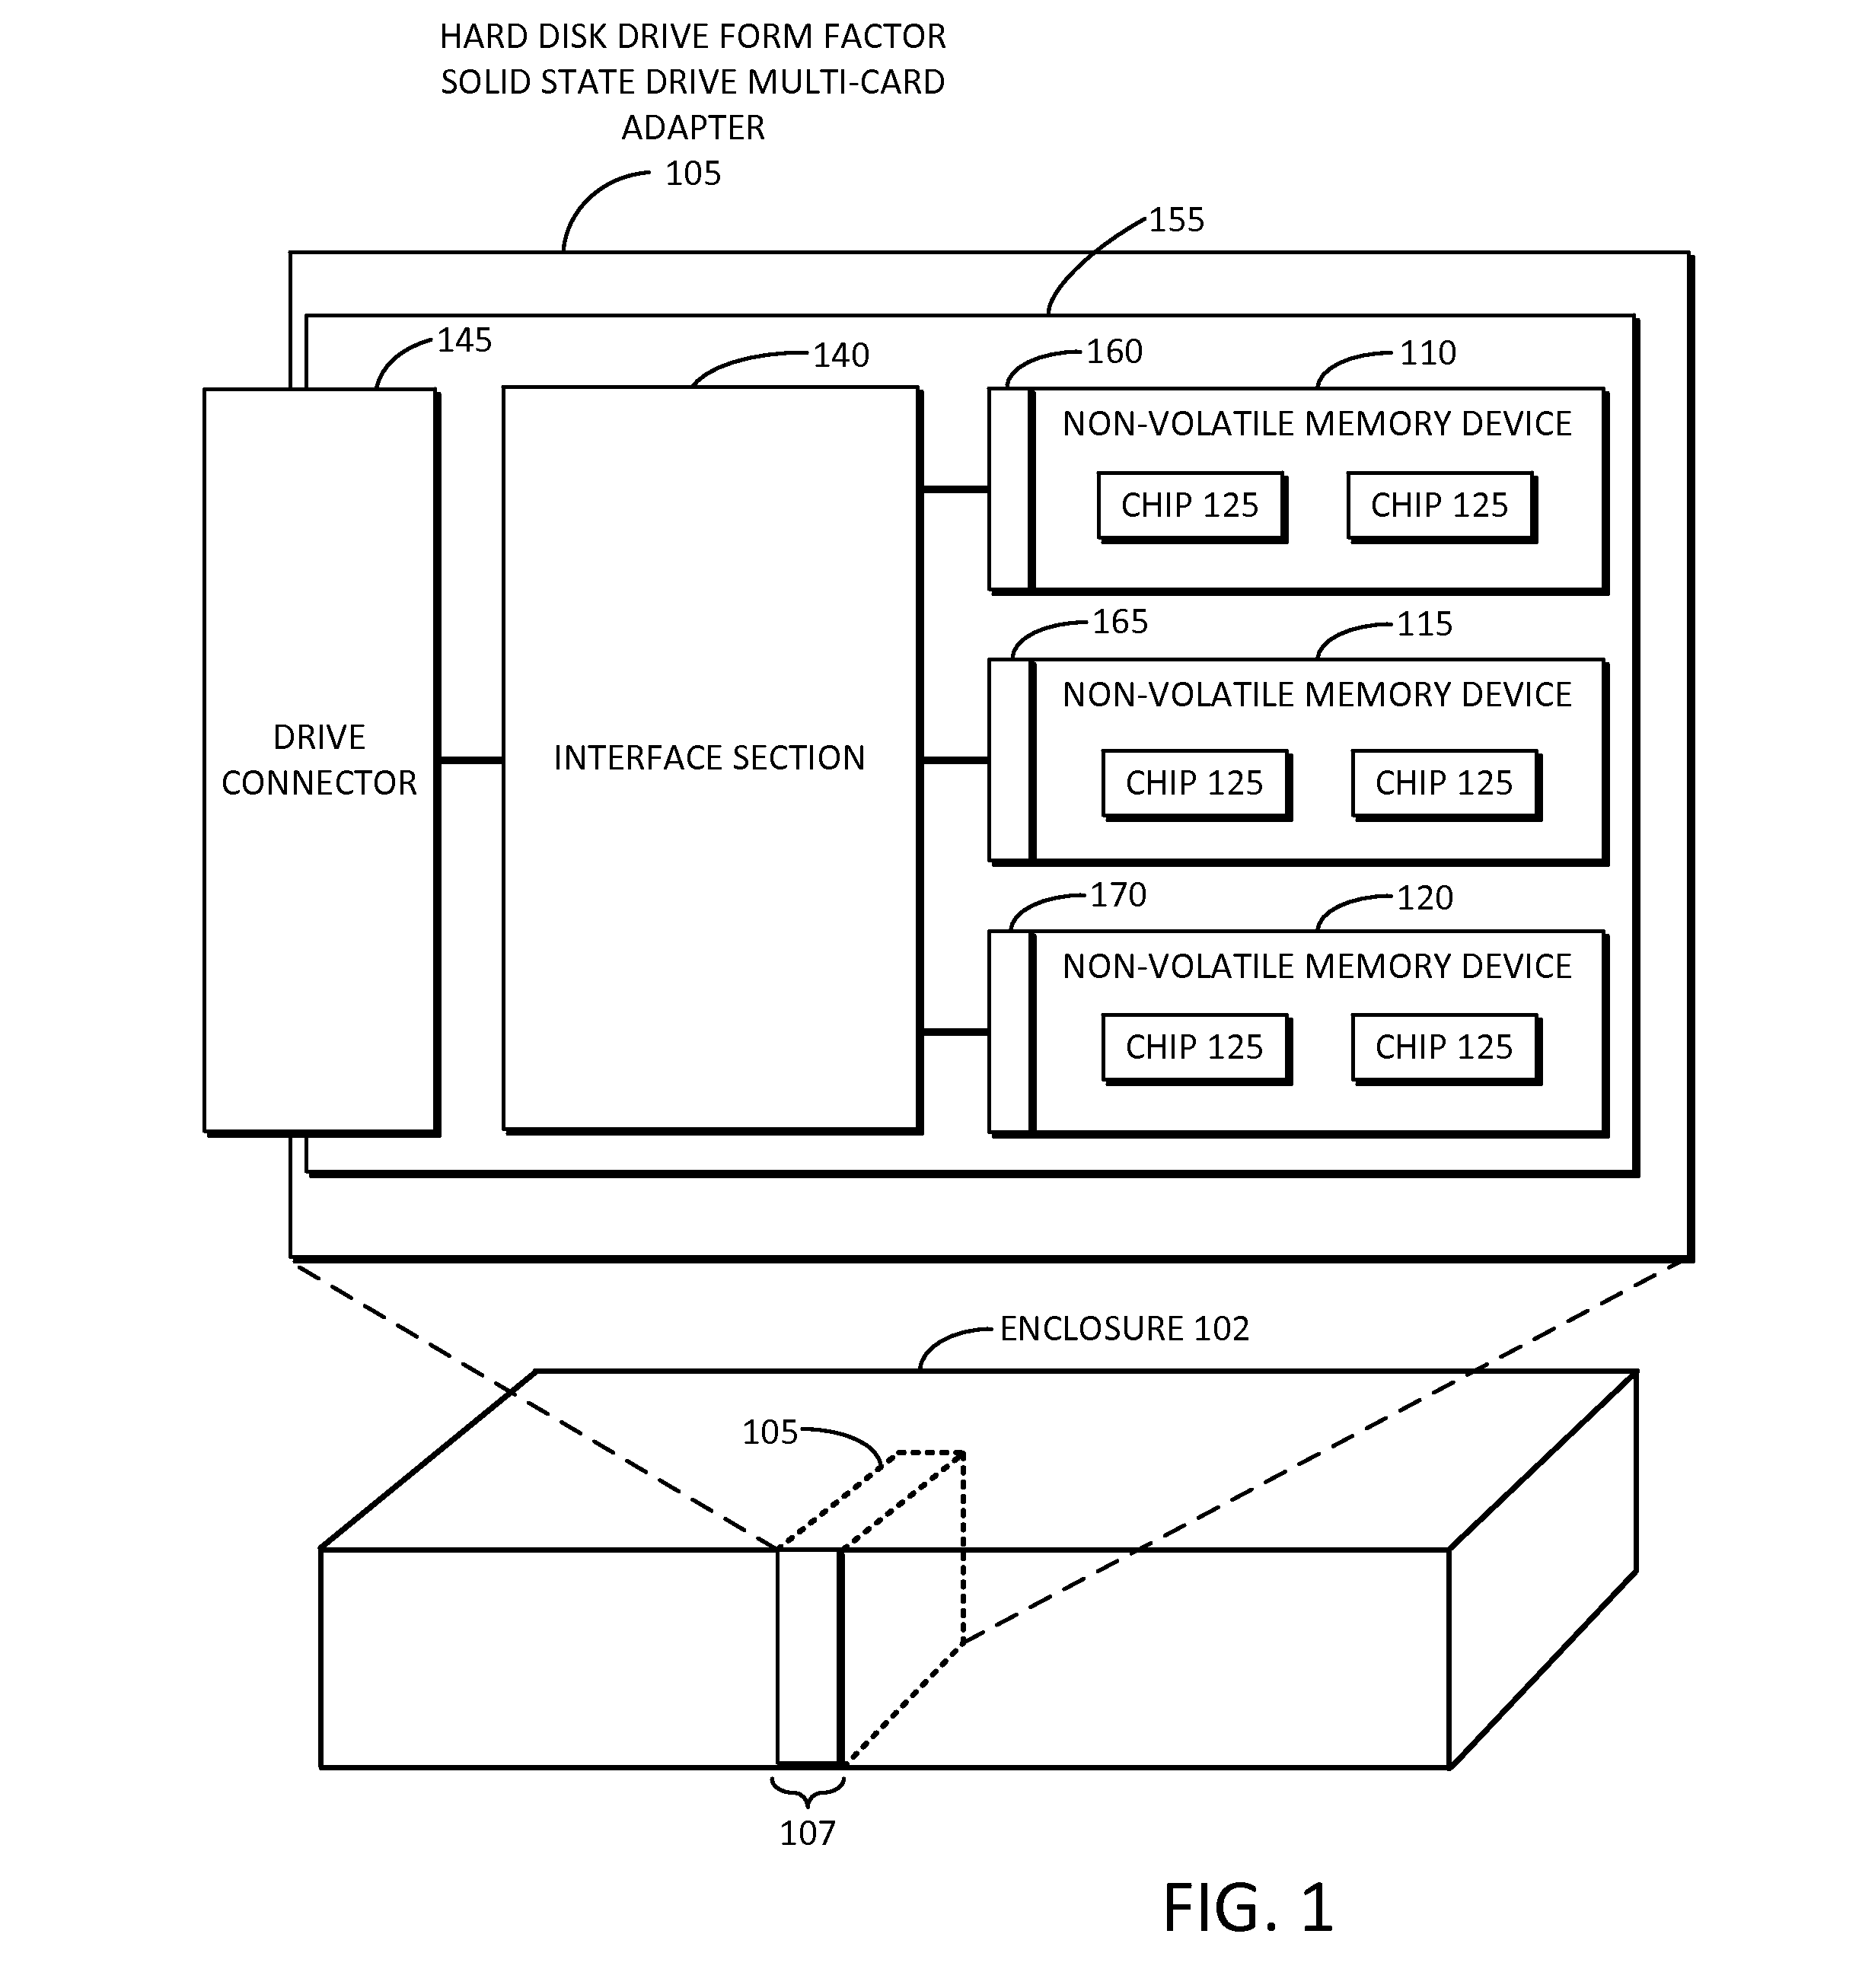 Solid state drive multi-card adapter with integrated processing